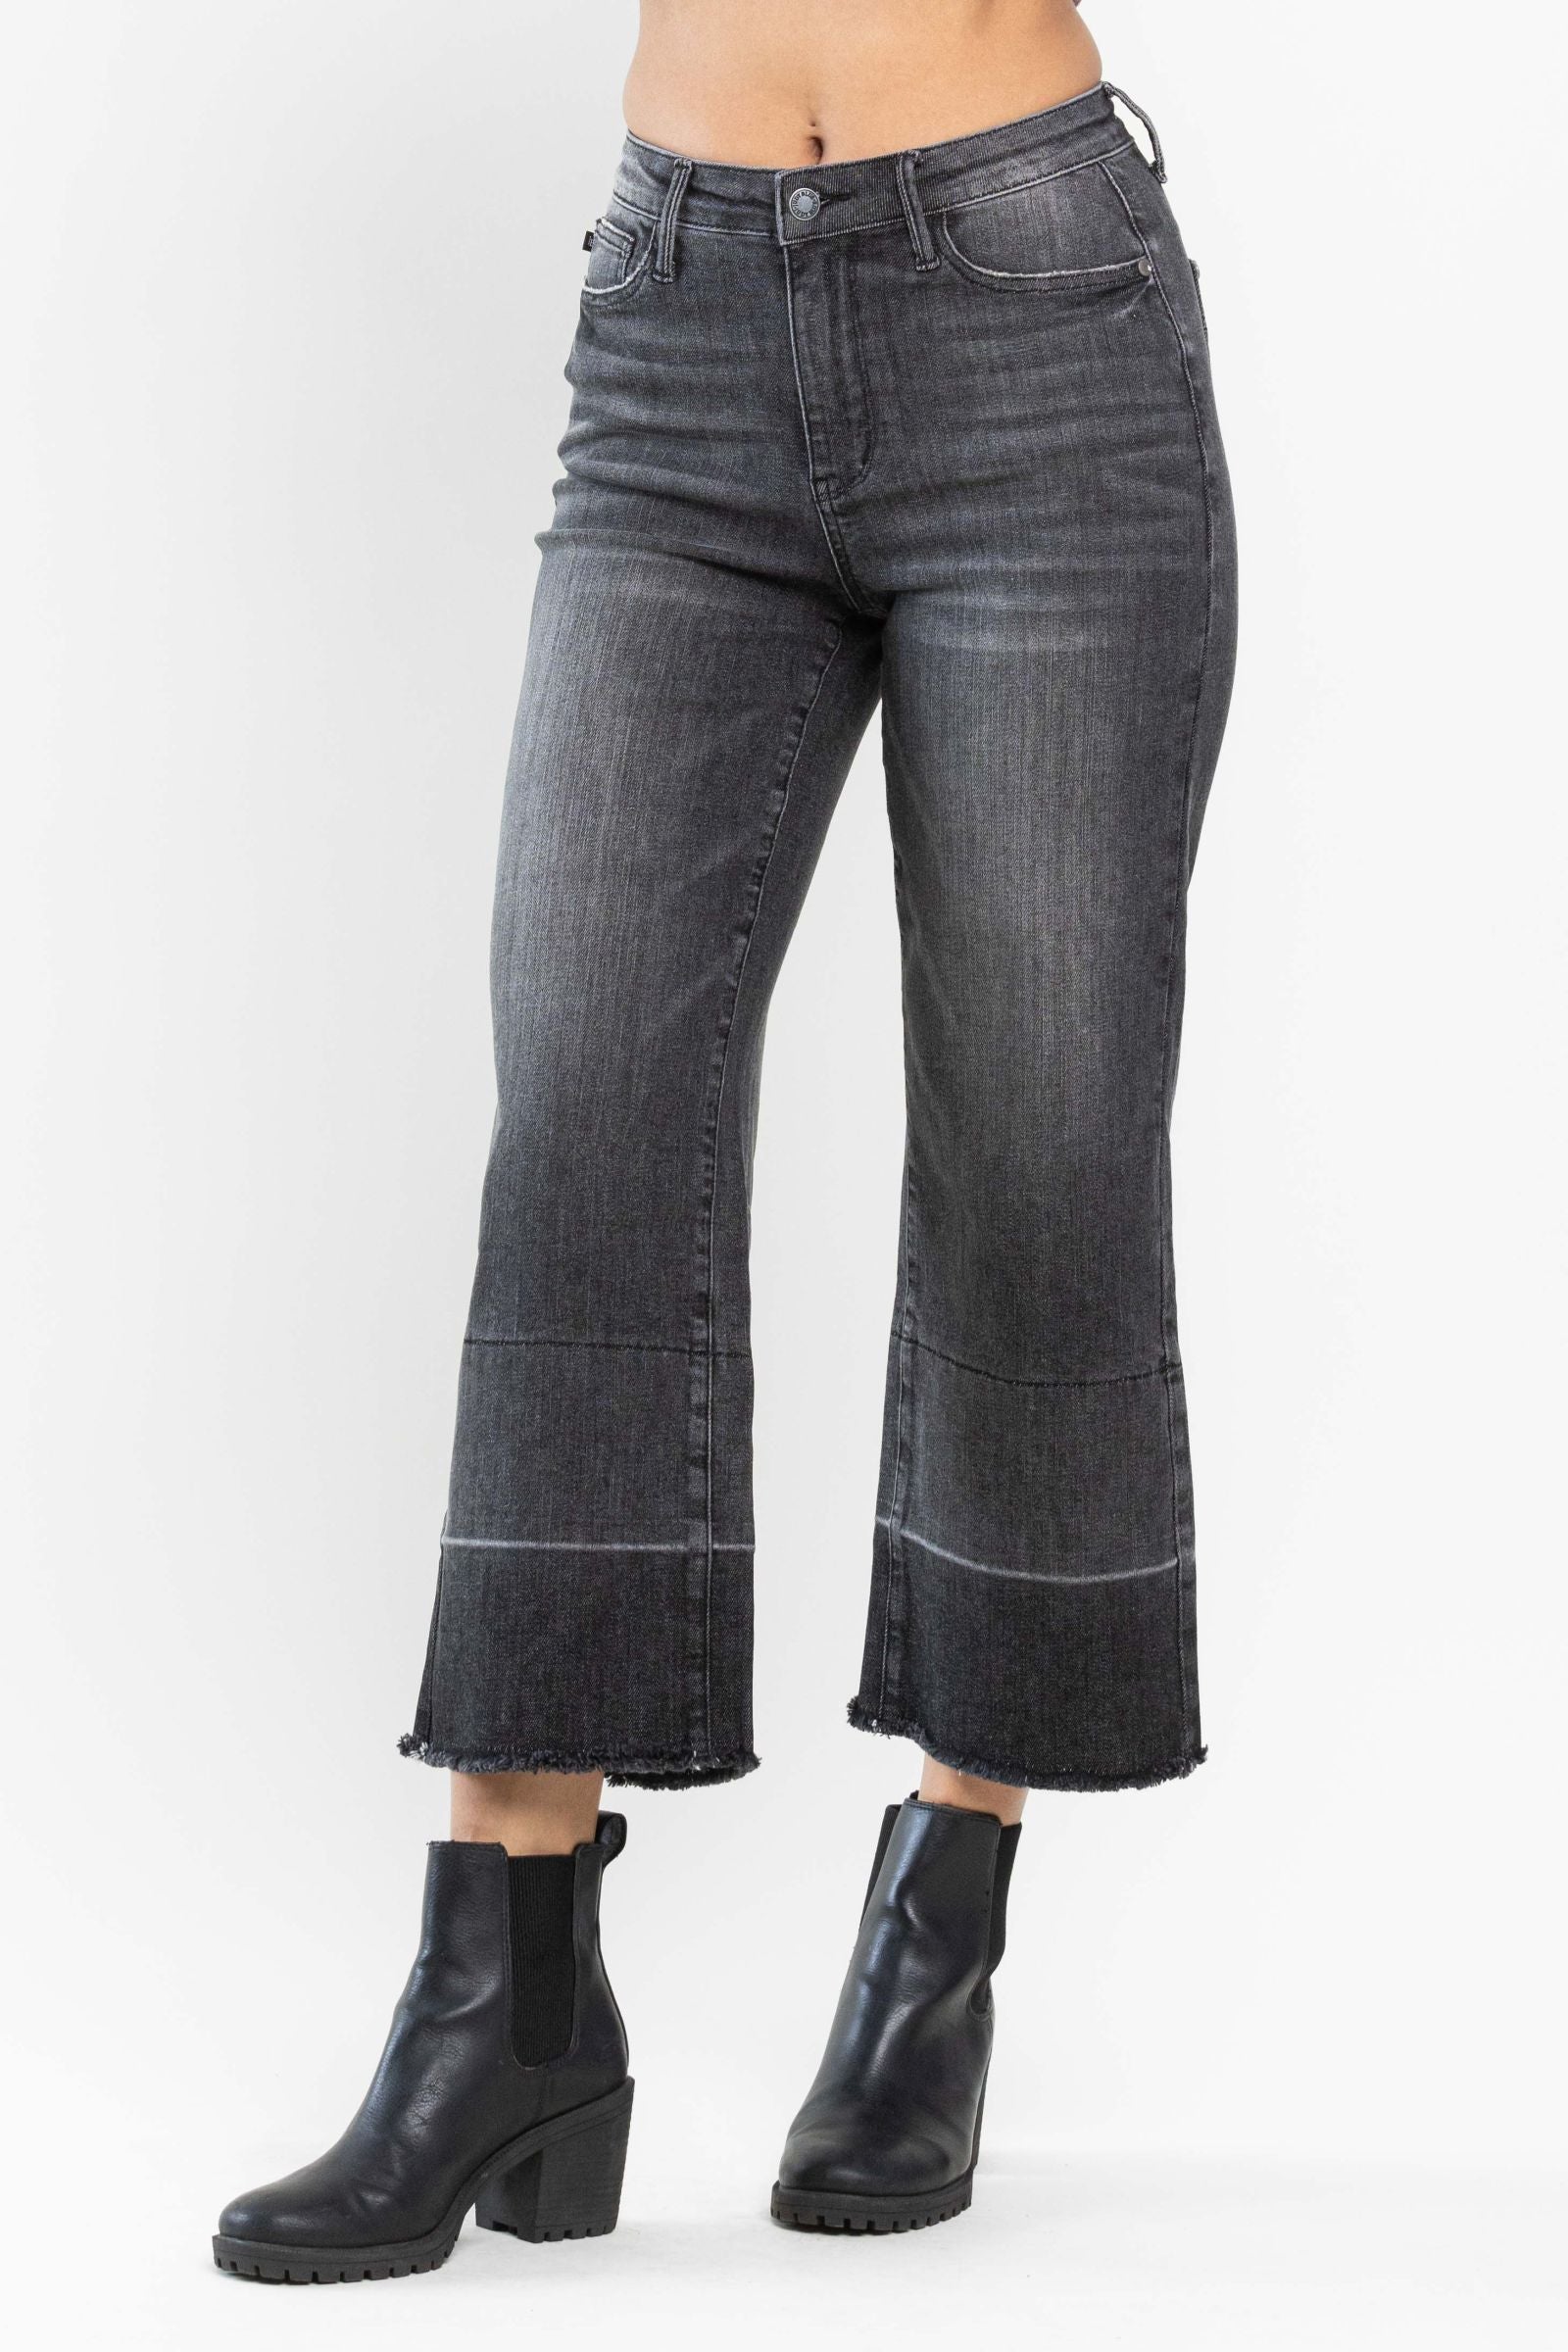 judy blue wide leg cropped gray jeans with released hem